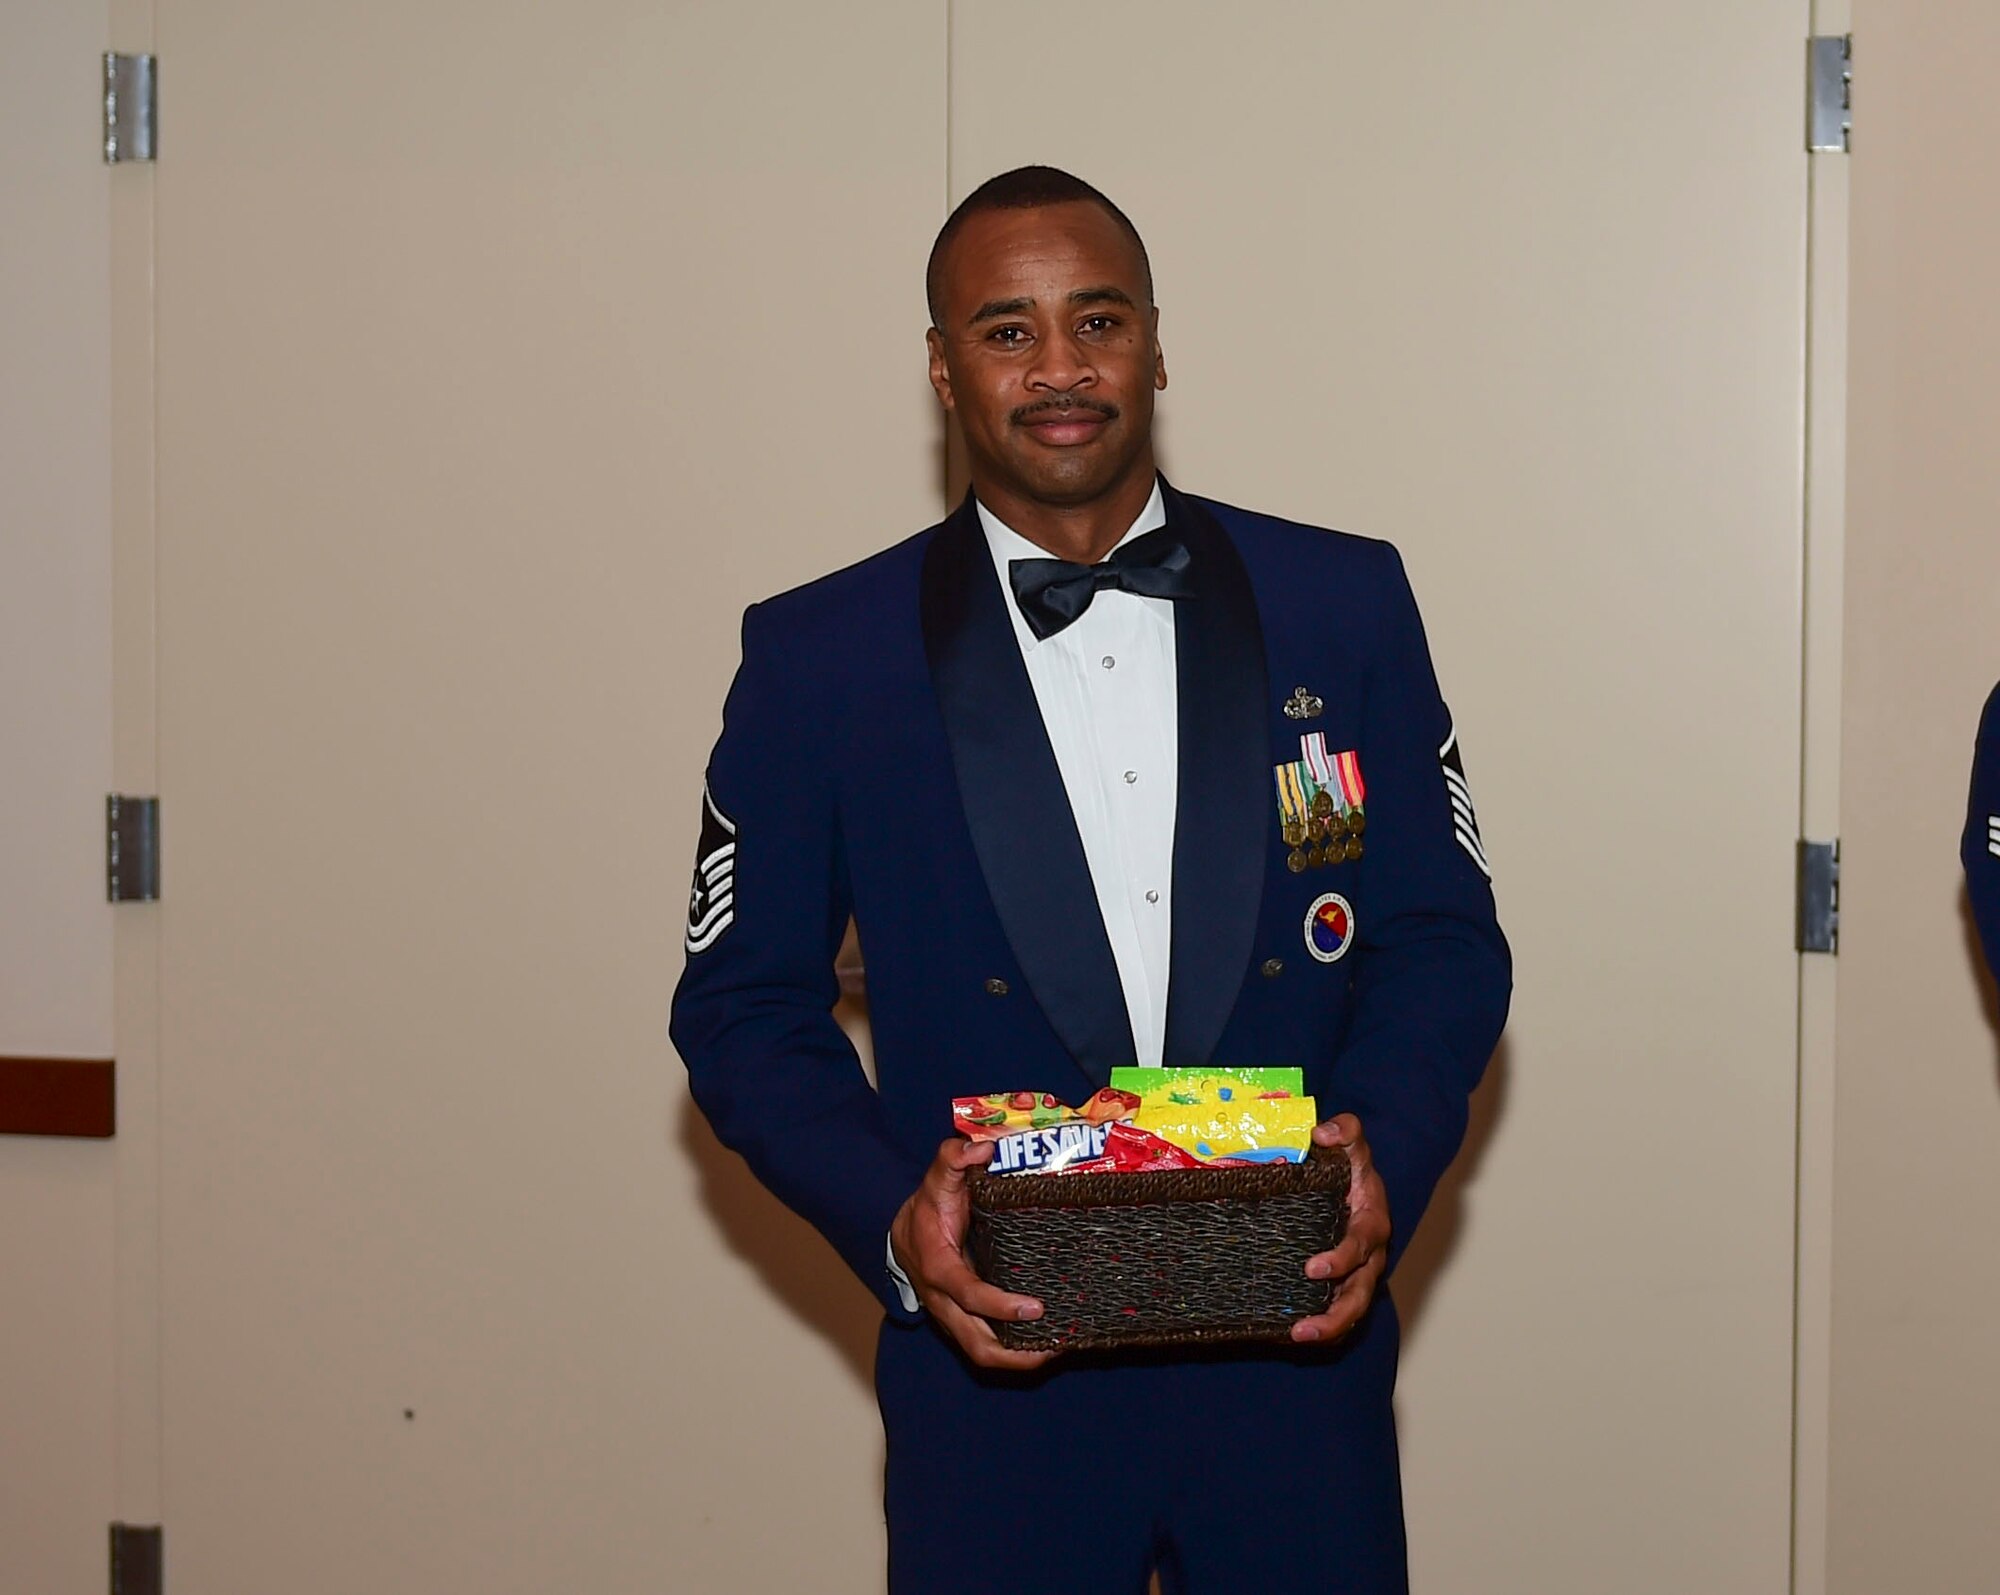 Master Sgt. Imari Motley, 460th Force Support Squadron Airman Leadership School commandant, receives a gift from ALS Class 18-A during their graduation Nov. 29, 2017, on Buckley Air Force Base, Colorado.